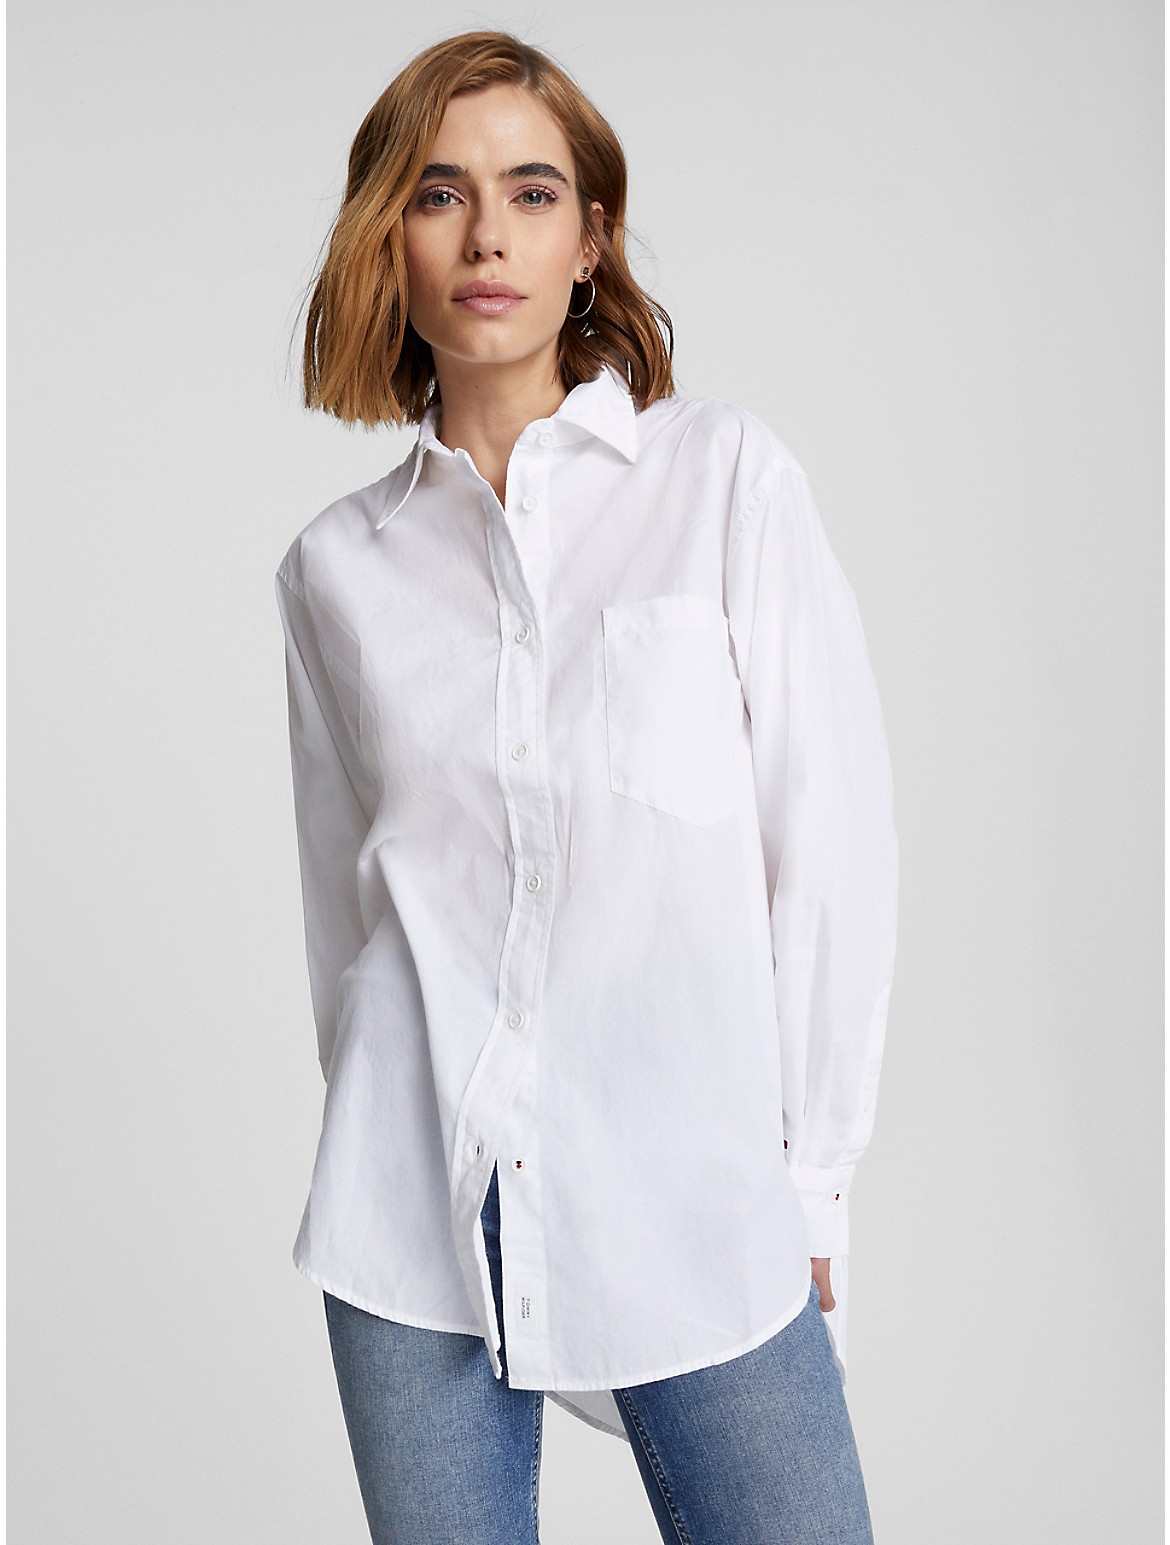 for Shirts Women TOMMY HILFIGER ModeSens |